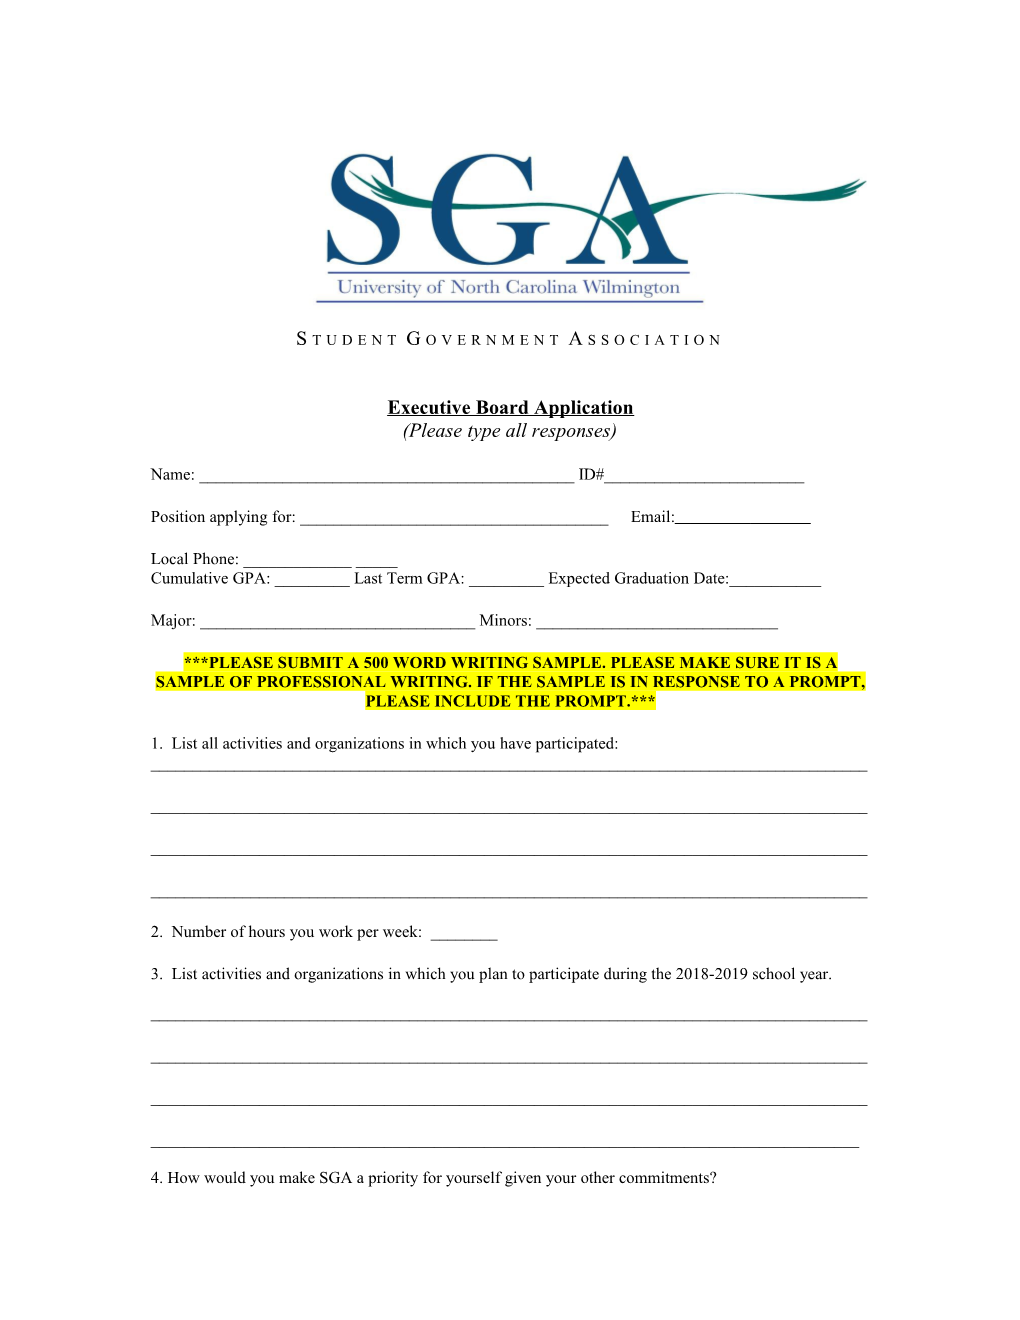 Position: Director of Communications, Student Government Association